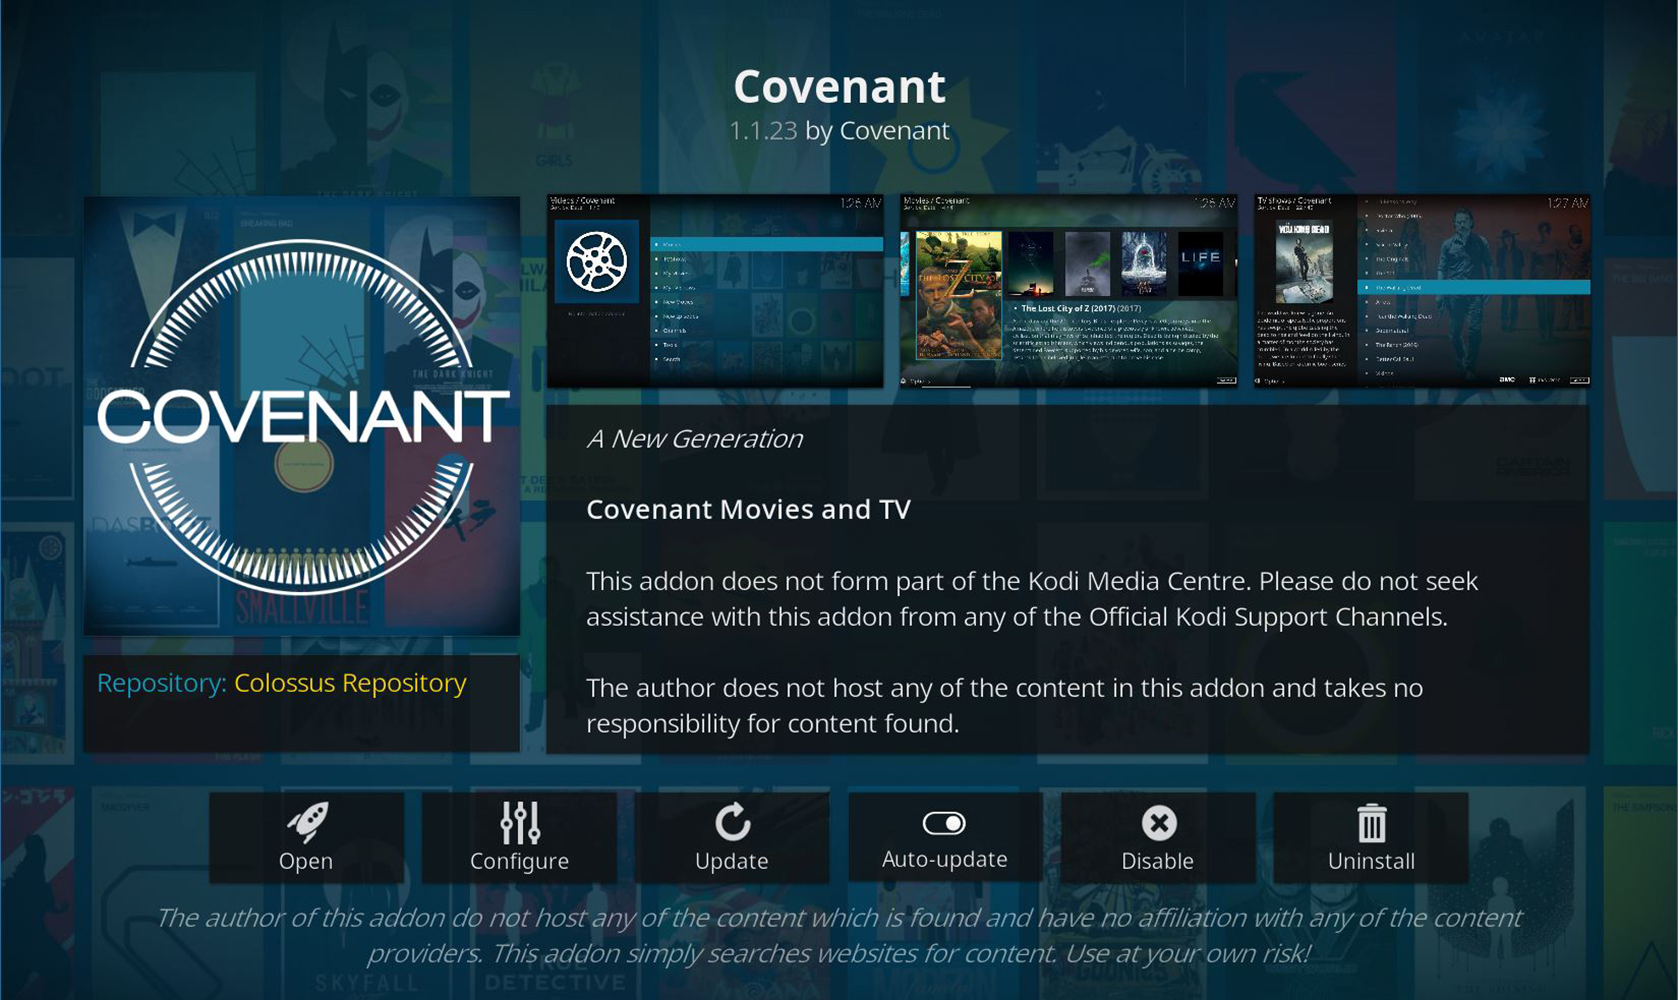 How To Install Covenant on Kodi